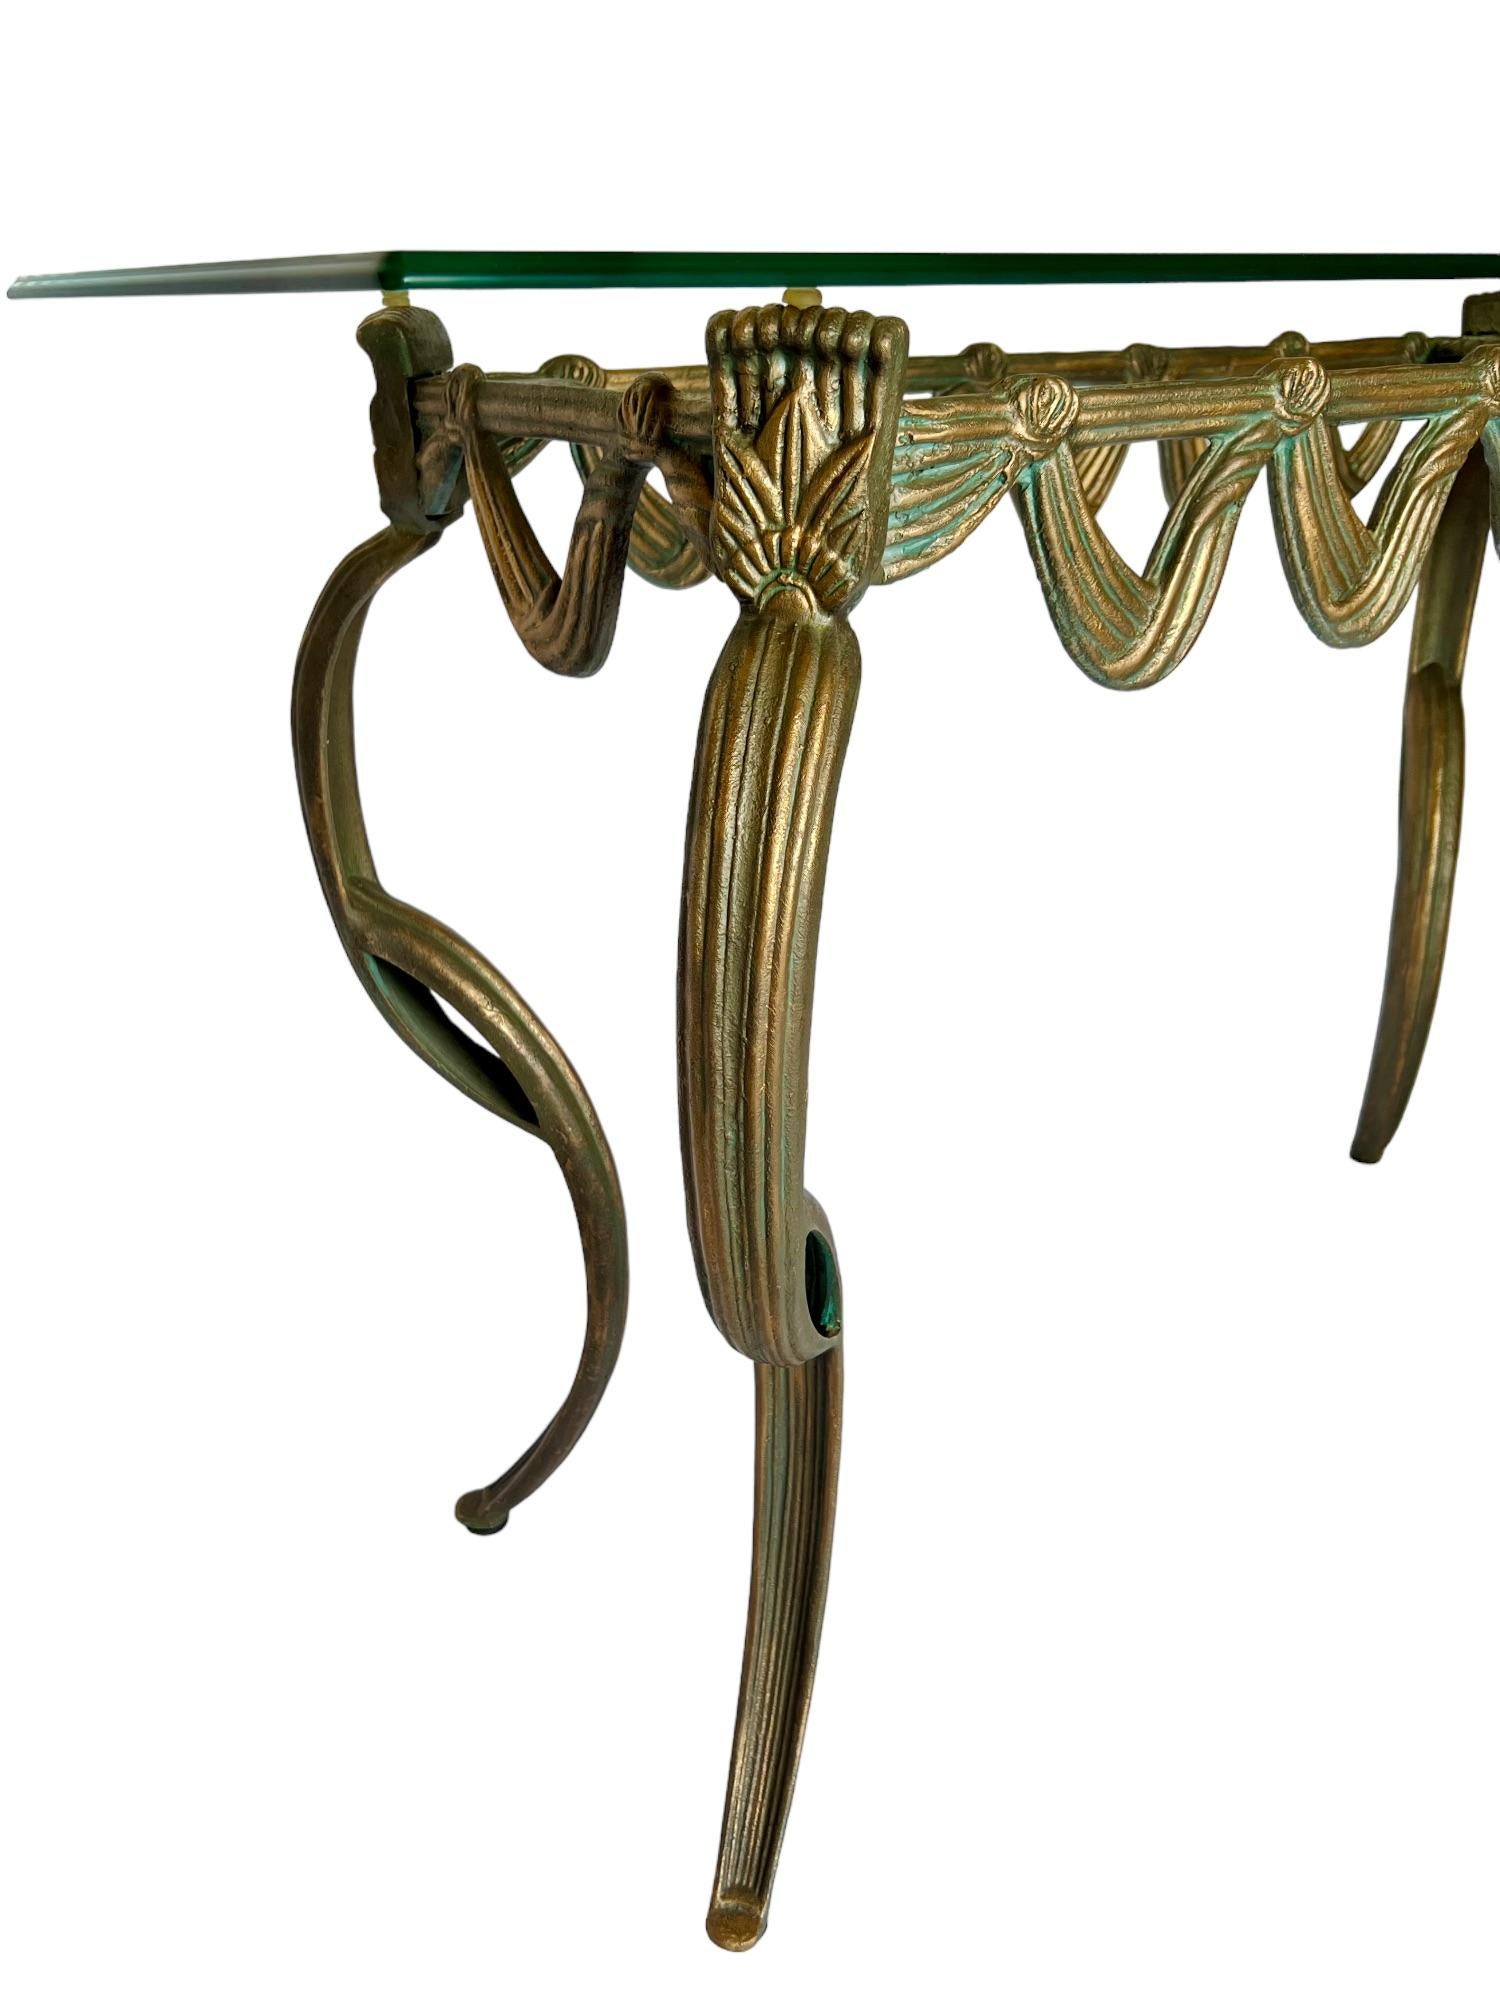 Gold Patinated Cast Metal Cabriole Console Table, Late 20th C. For Sale 4